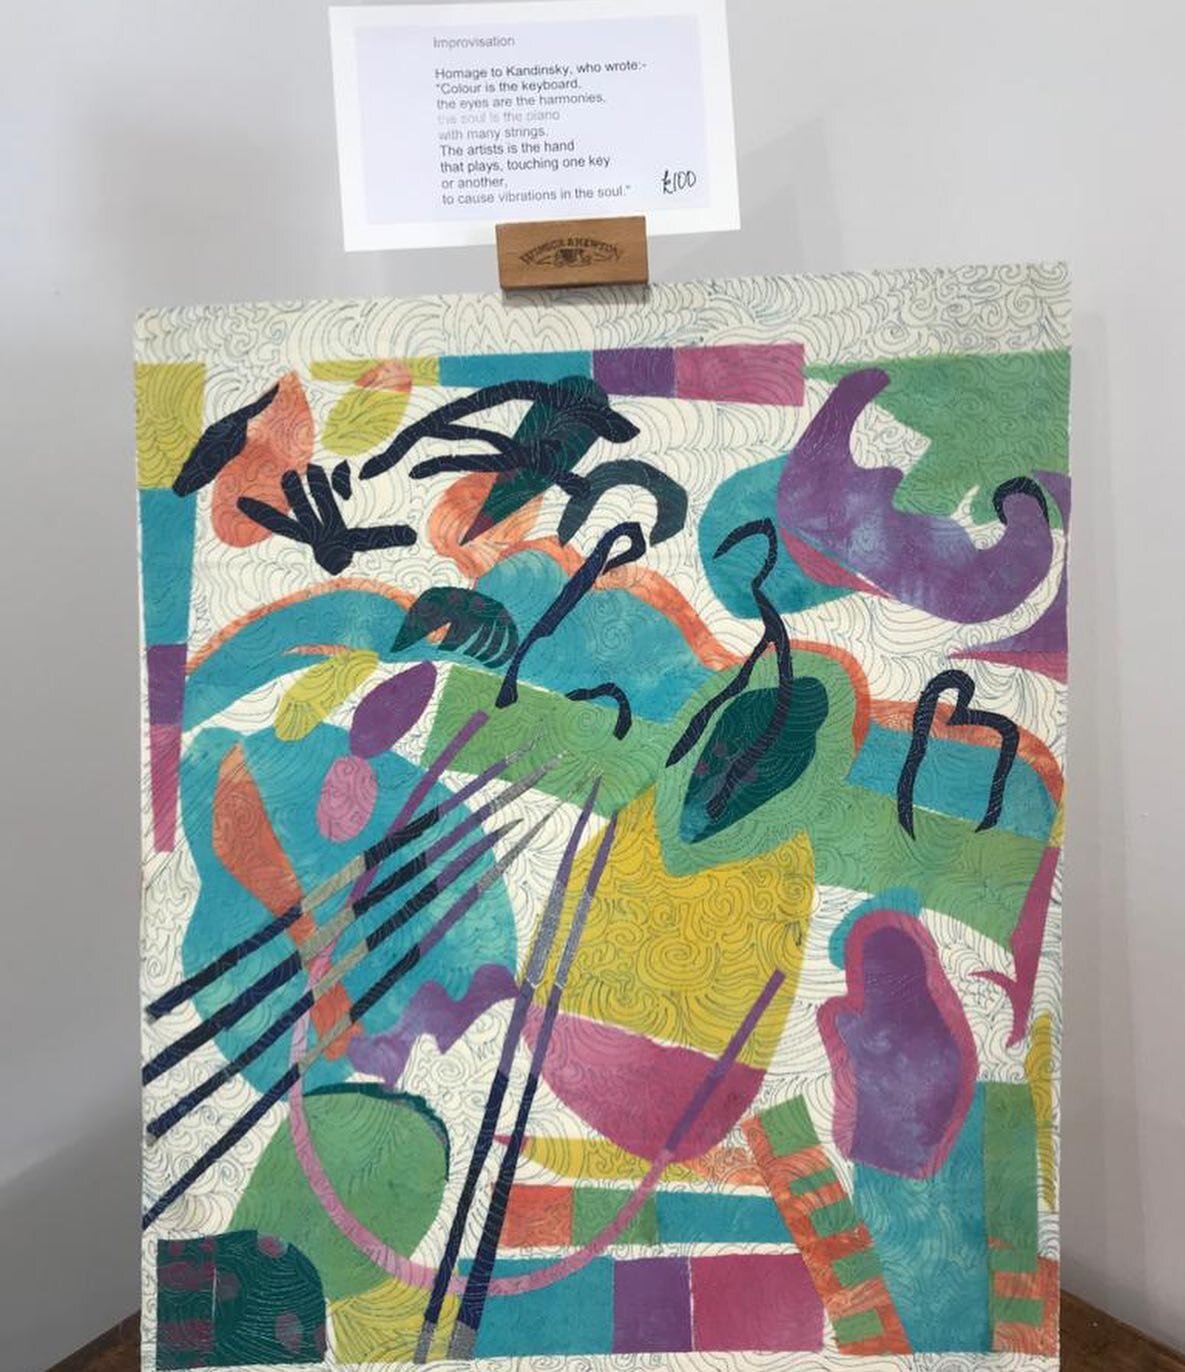 Beautiful &lsquo;Improvisation&rsquo; art piece by Jane Barry for &pound;100! 
&bull;The postcard reads:
Homage to Kandinsky, who wrote:-
&ldquo;Colour is the keyboard,
the eyes are the harmonies,
the soul is the piano
with many strings.
The artists 